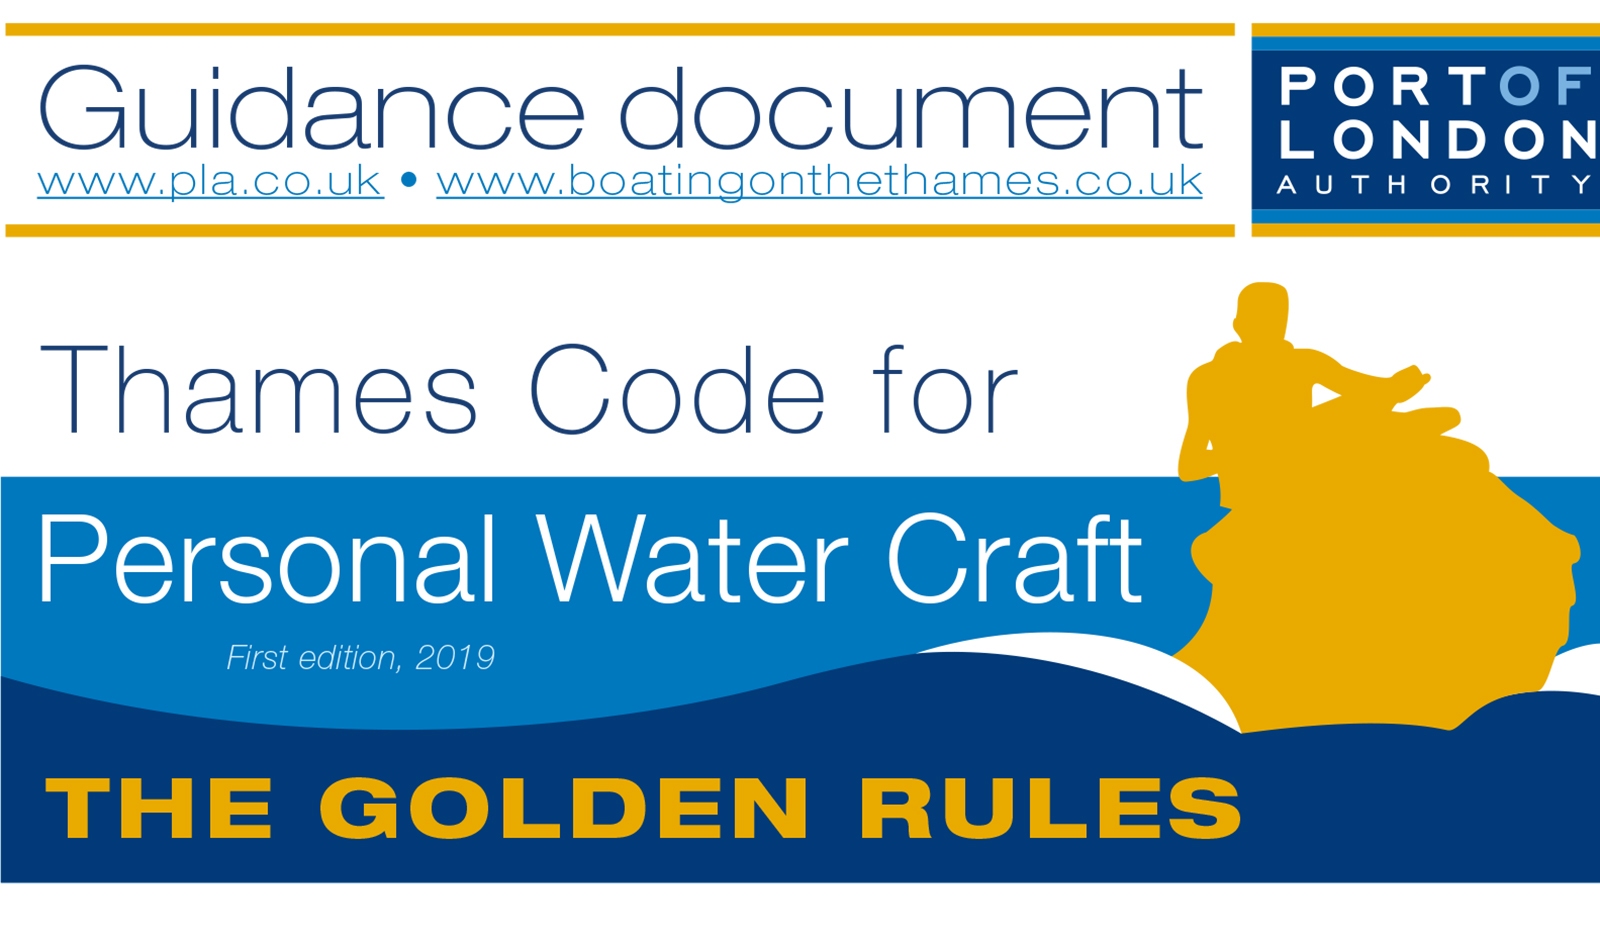 Thames Code for Personal Water Craft